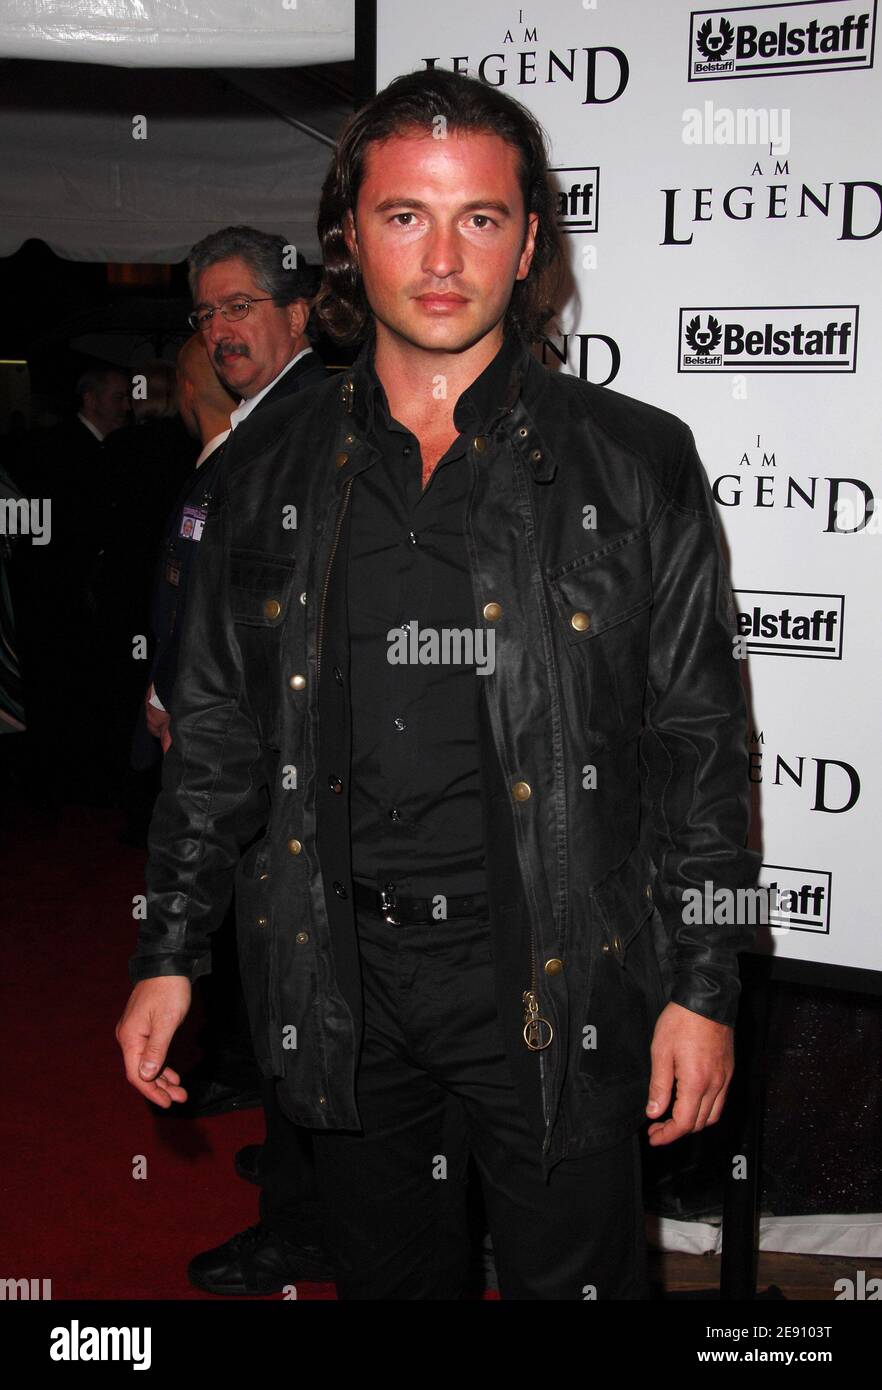 Creative director of Belstaff, Manuele Malenotti attends Warner Brothers'  premiere of 'I Am Legend' at The WaMu Theater at Madison Square Garden in  New York City, USA on December 11, 2007. Photo